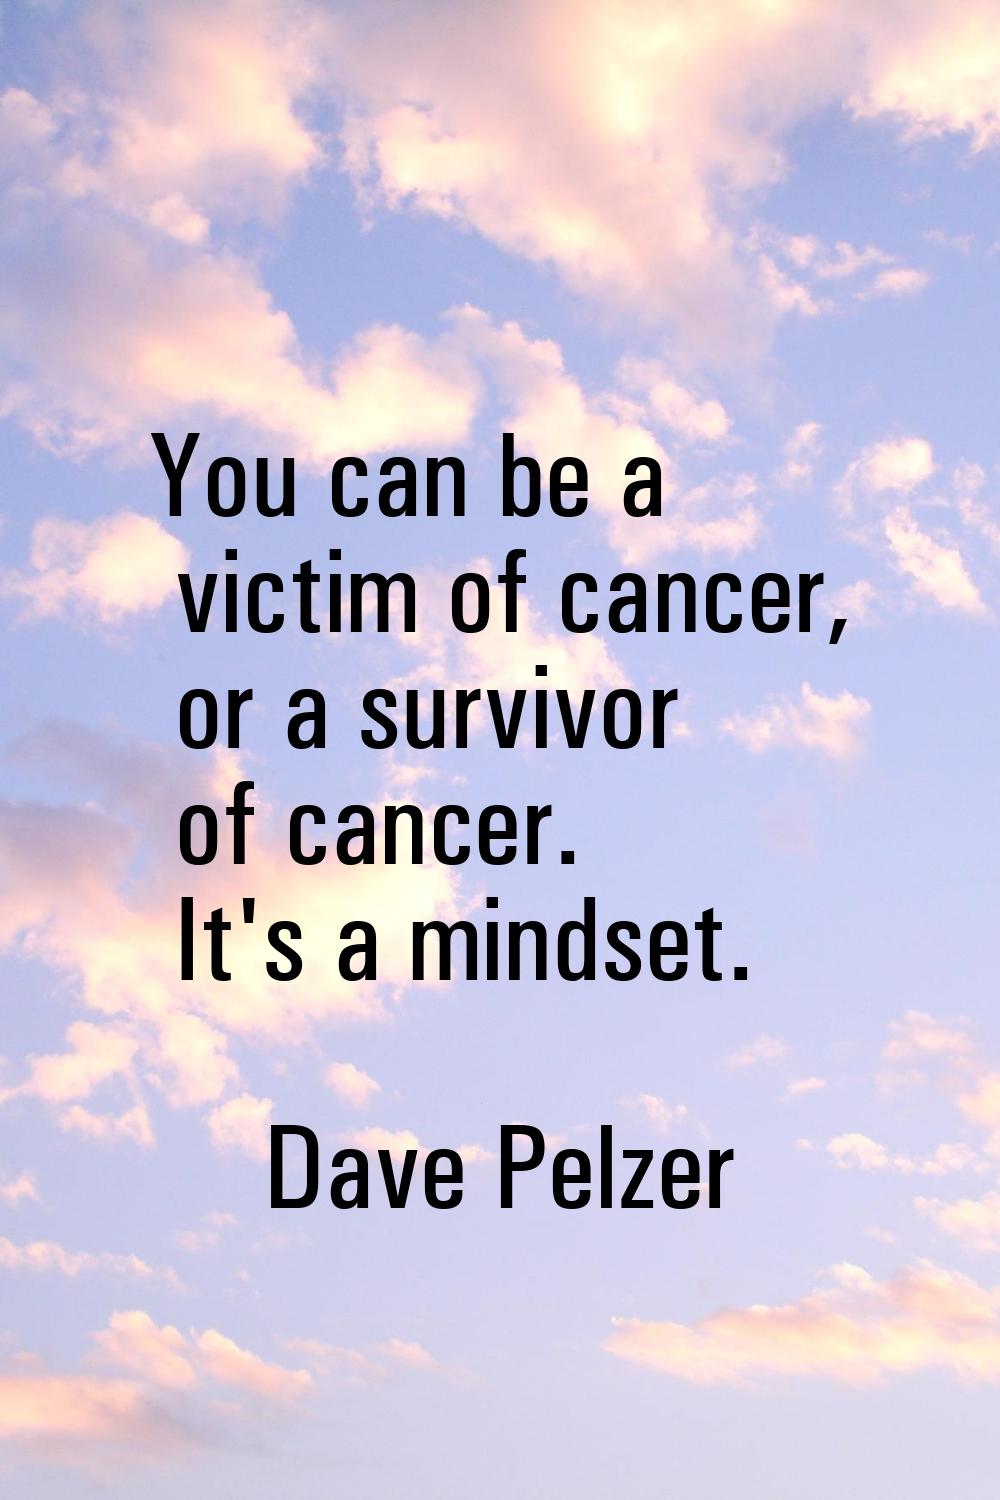 You can be a victim of cancer, or a survivor of cancer. It's a mindset.